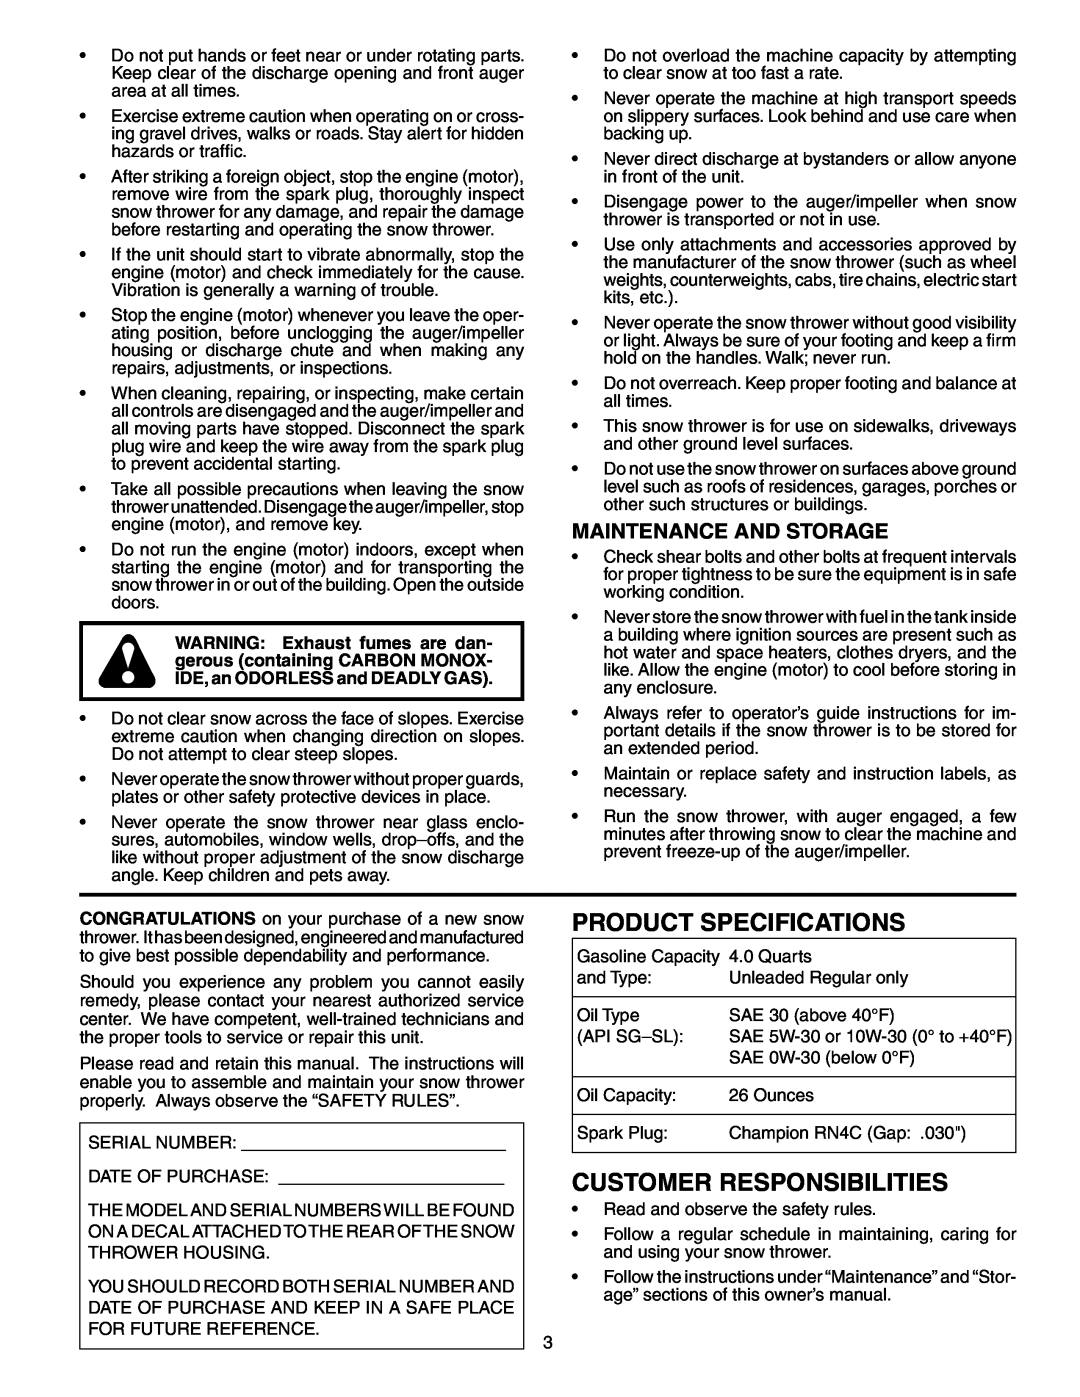 Poulan PP927ESC owner manual Maintenance And Storage, Product Specifications, Customer Responsibilities 